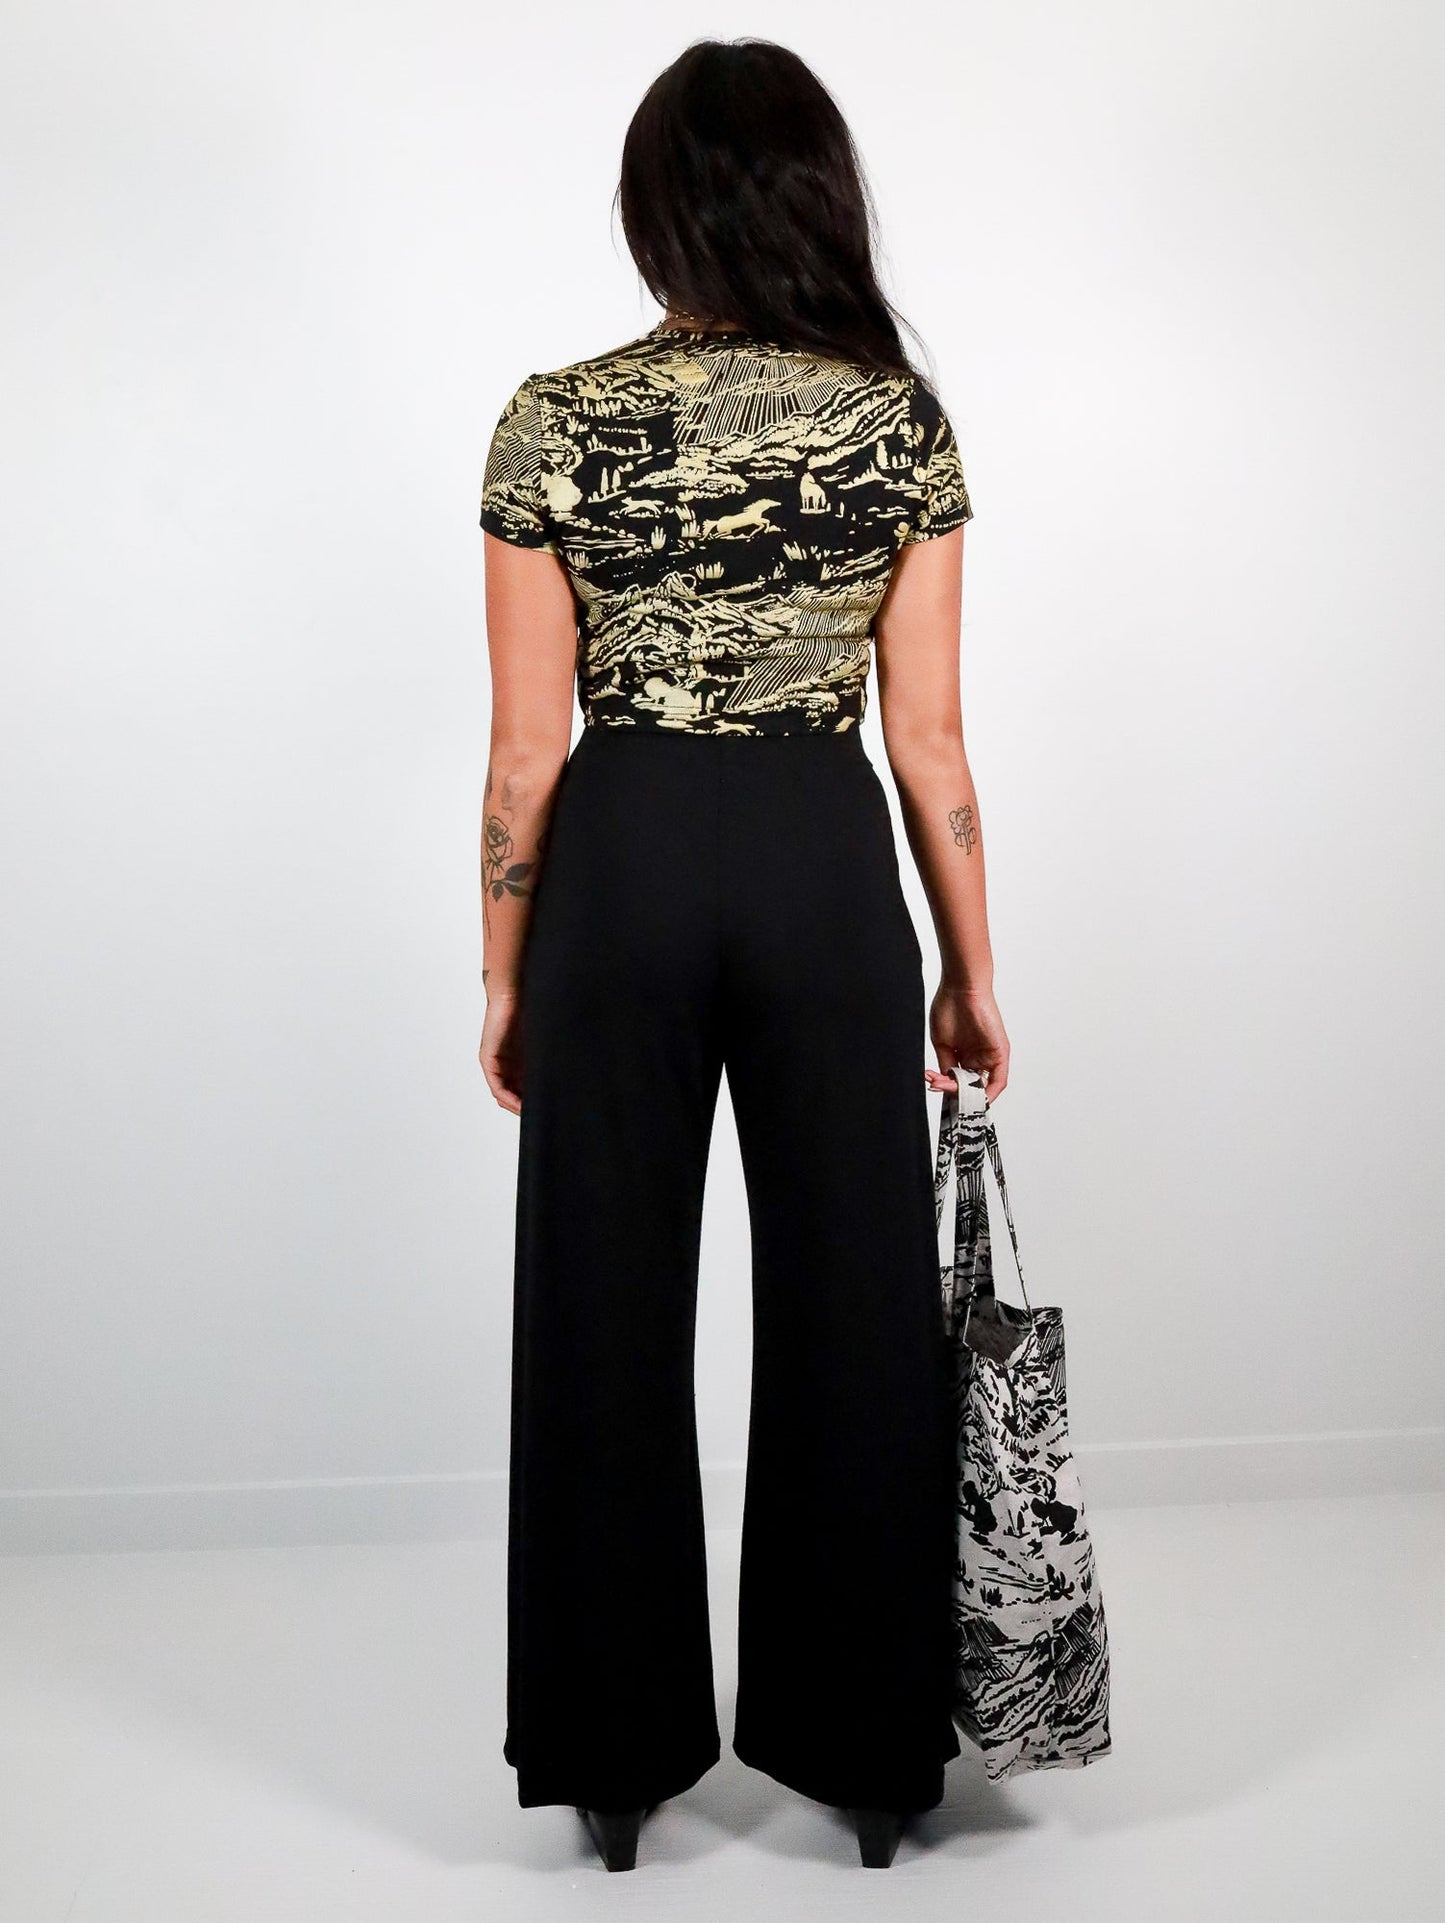 Black High Waisted Wide Leg Pants - Thief and Bandit